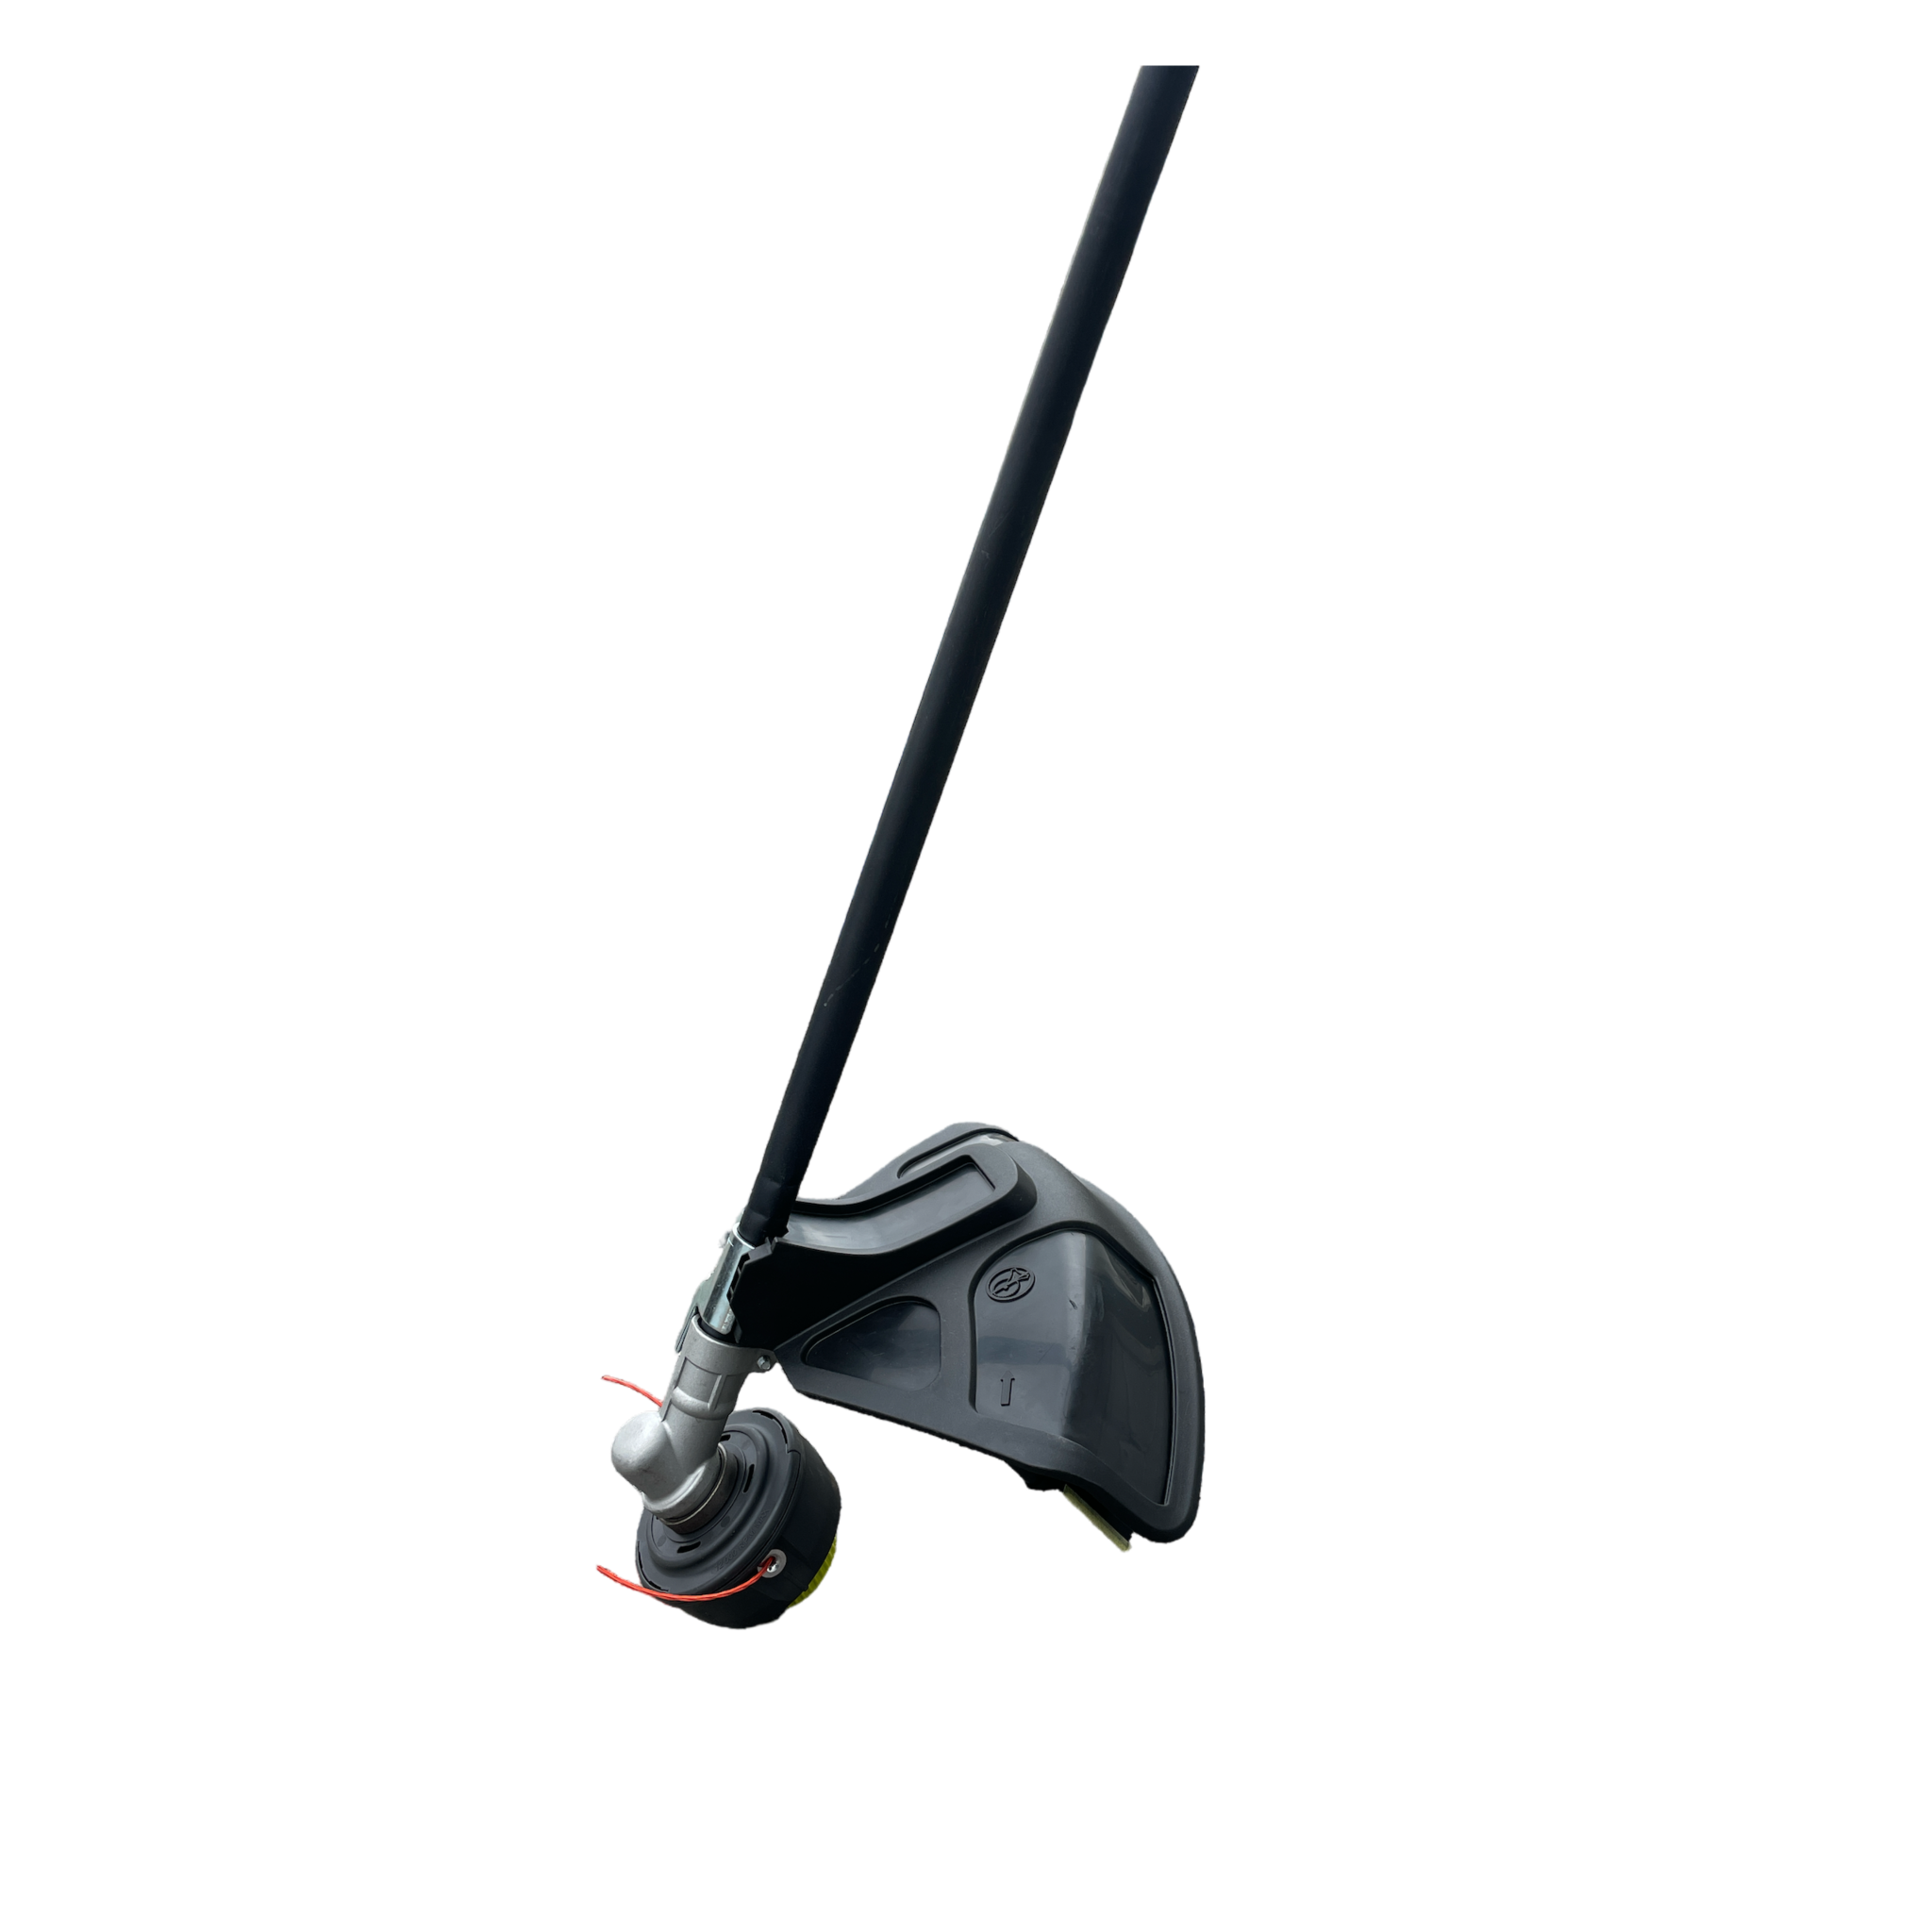 Homelite 2-Cycle 26 CC Straight Shaft Gas Trimmer